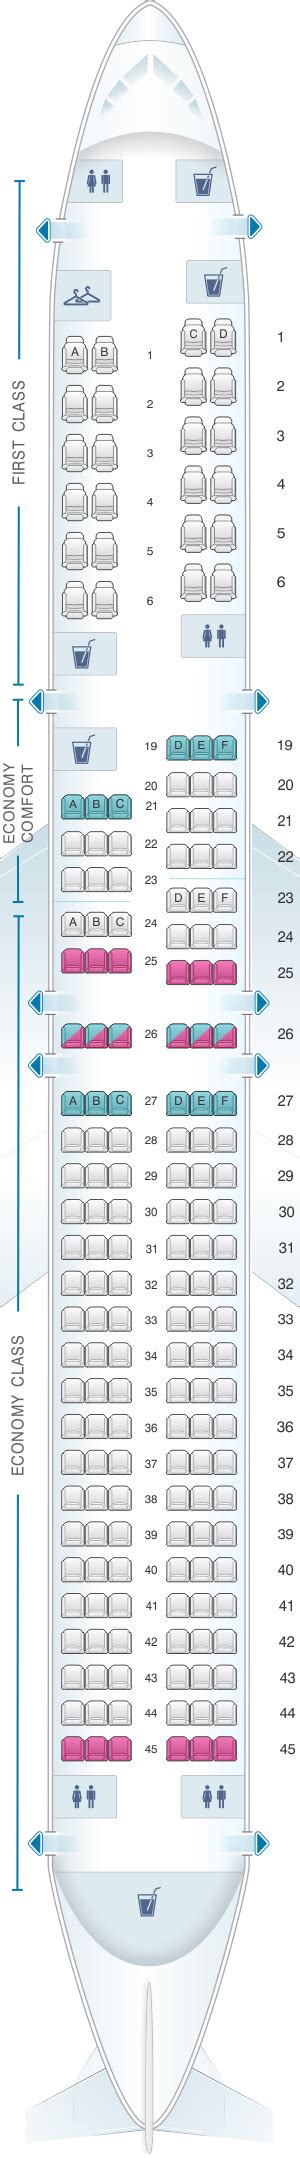 Seat Map Boeing 757 200 Delta Airlines Best Seats In Plane Images And